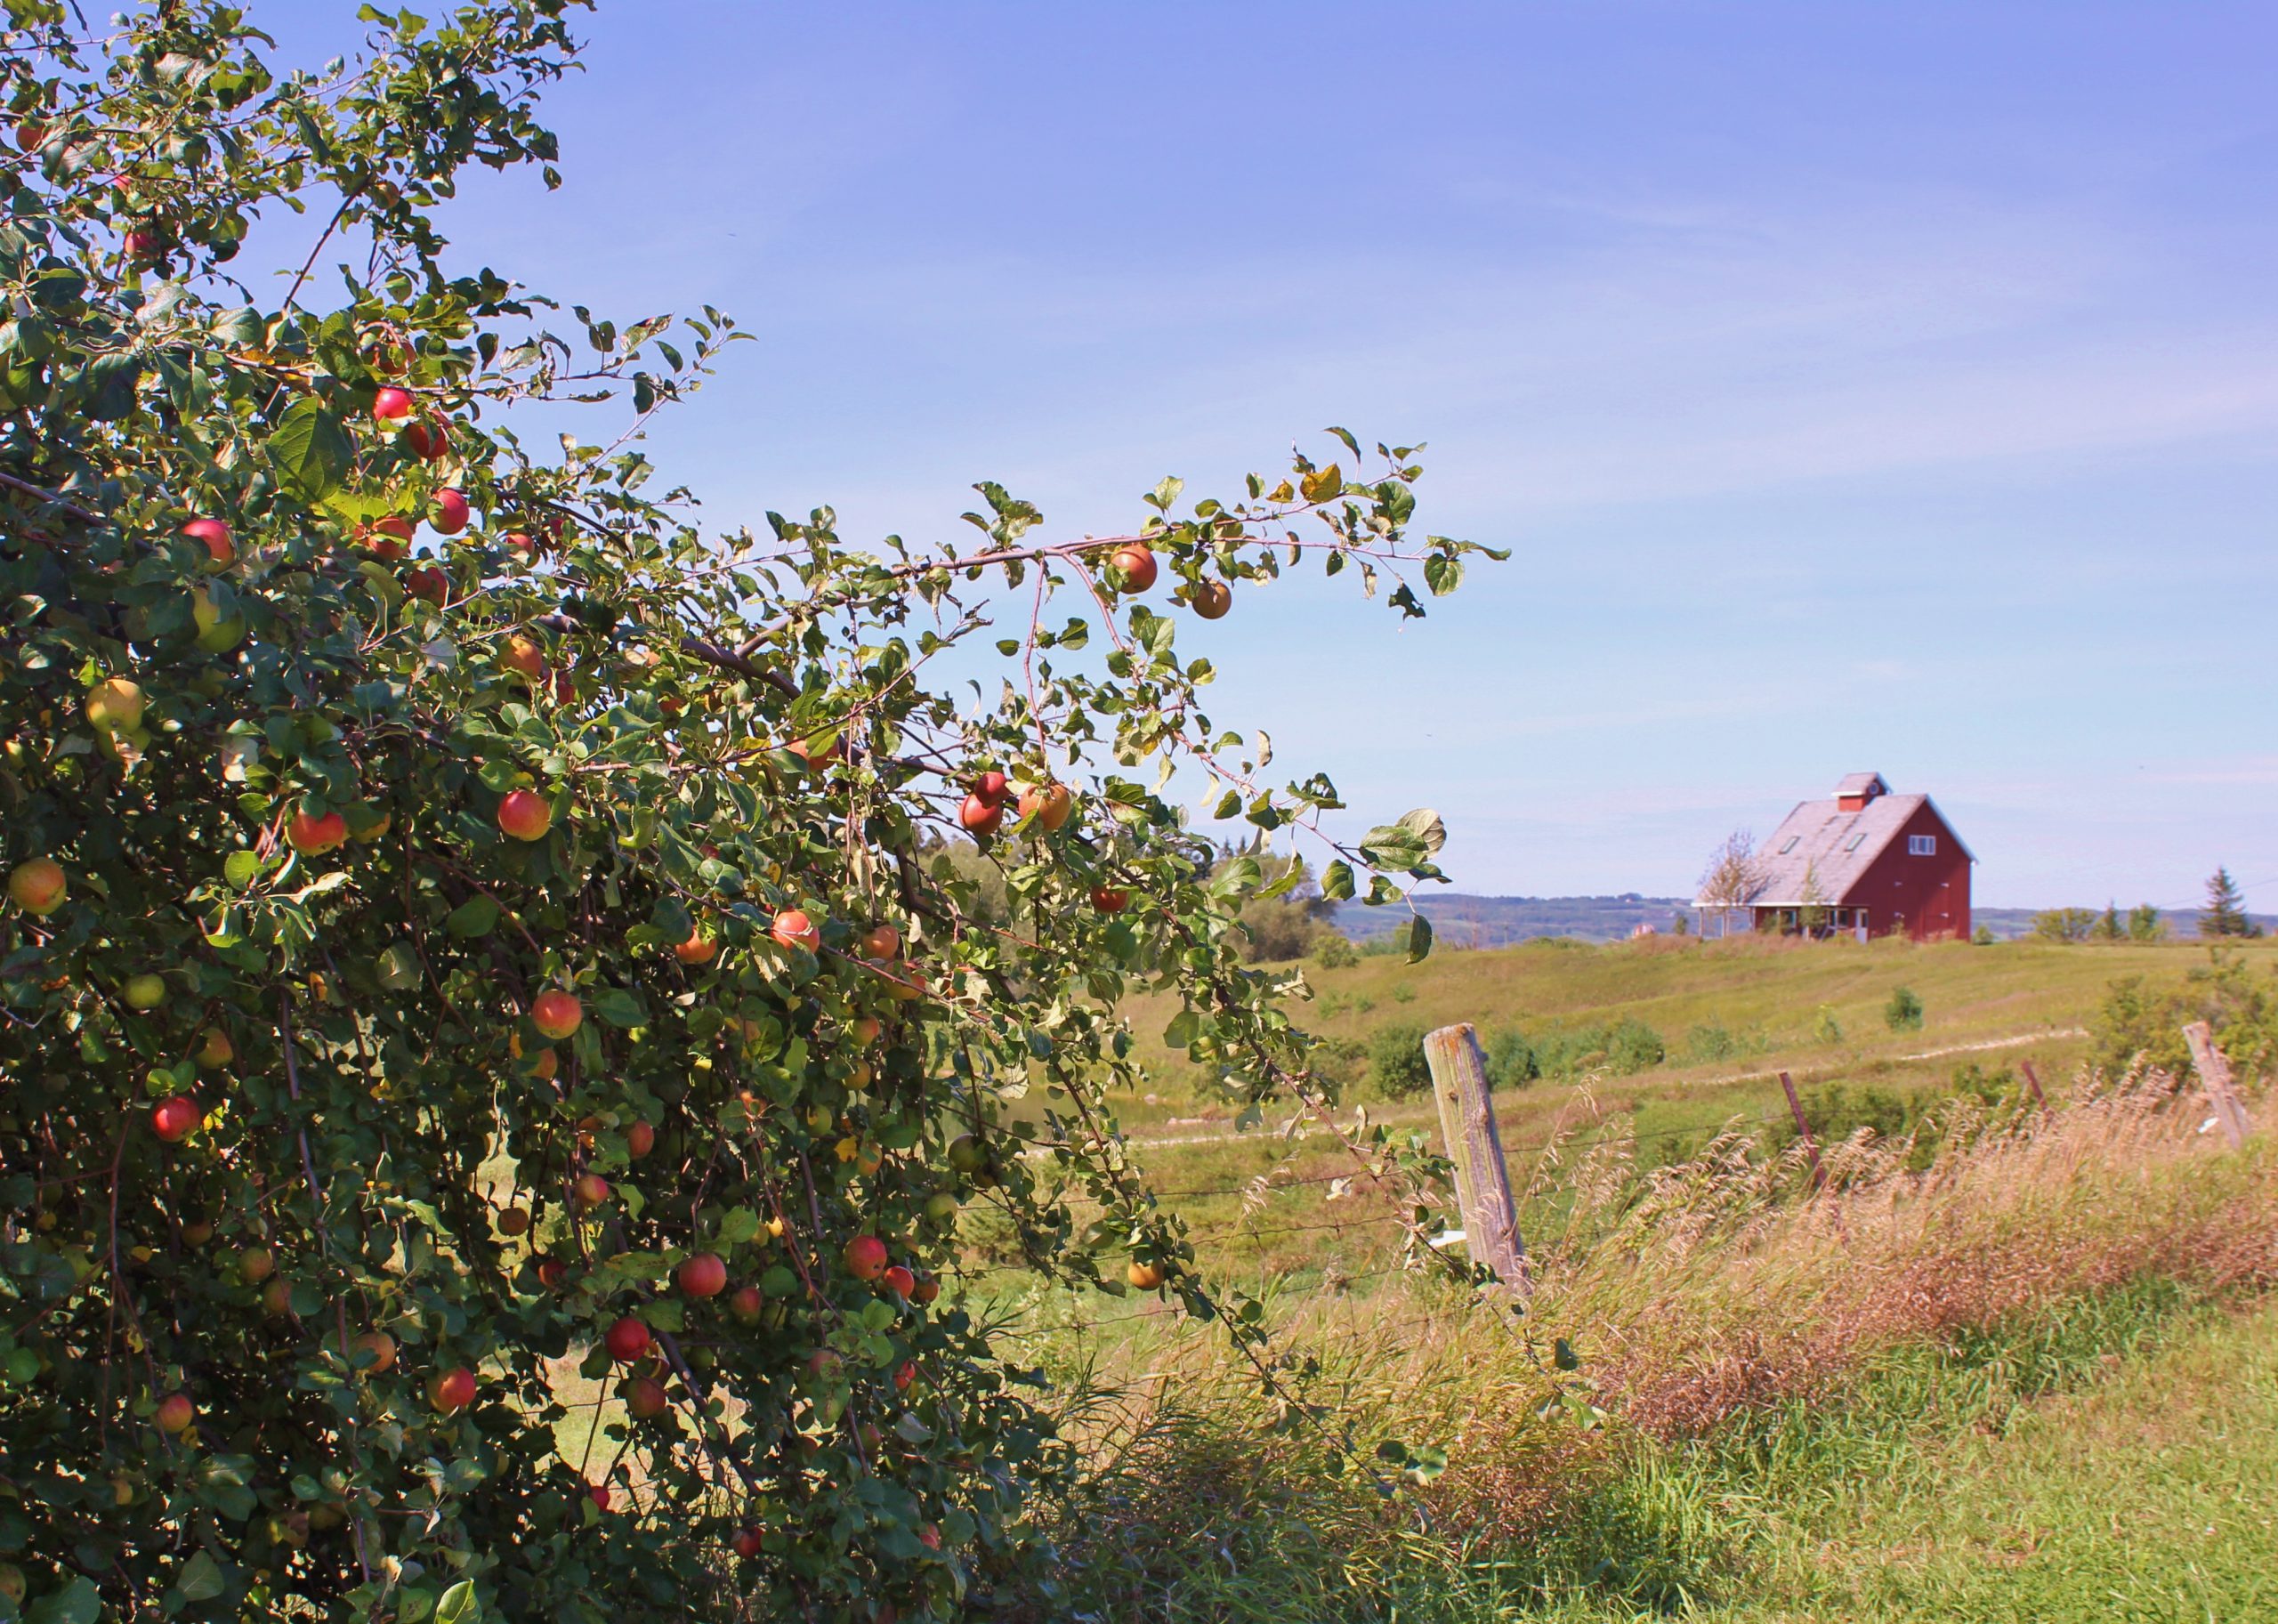 image of an apple tree on the side of a road and a red barn off in the distance